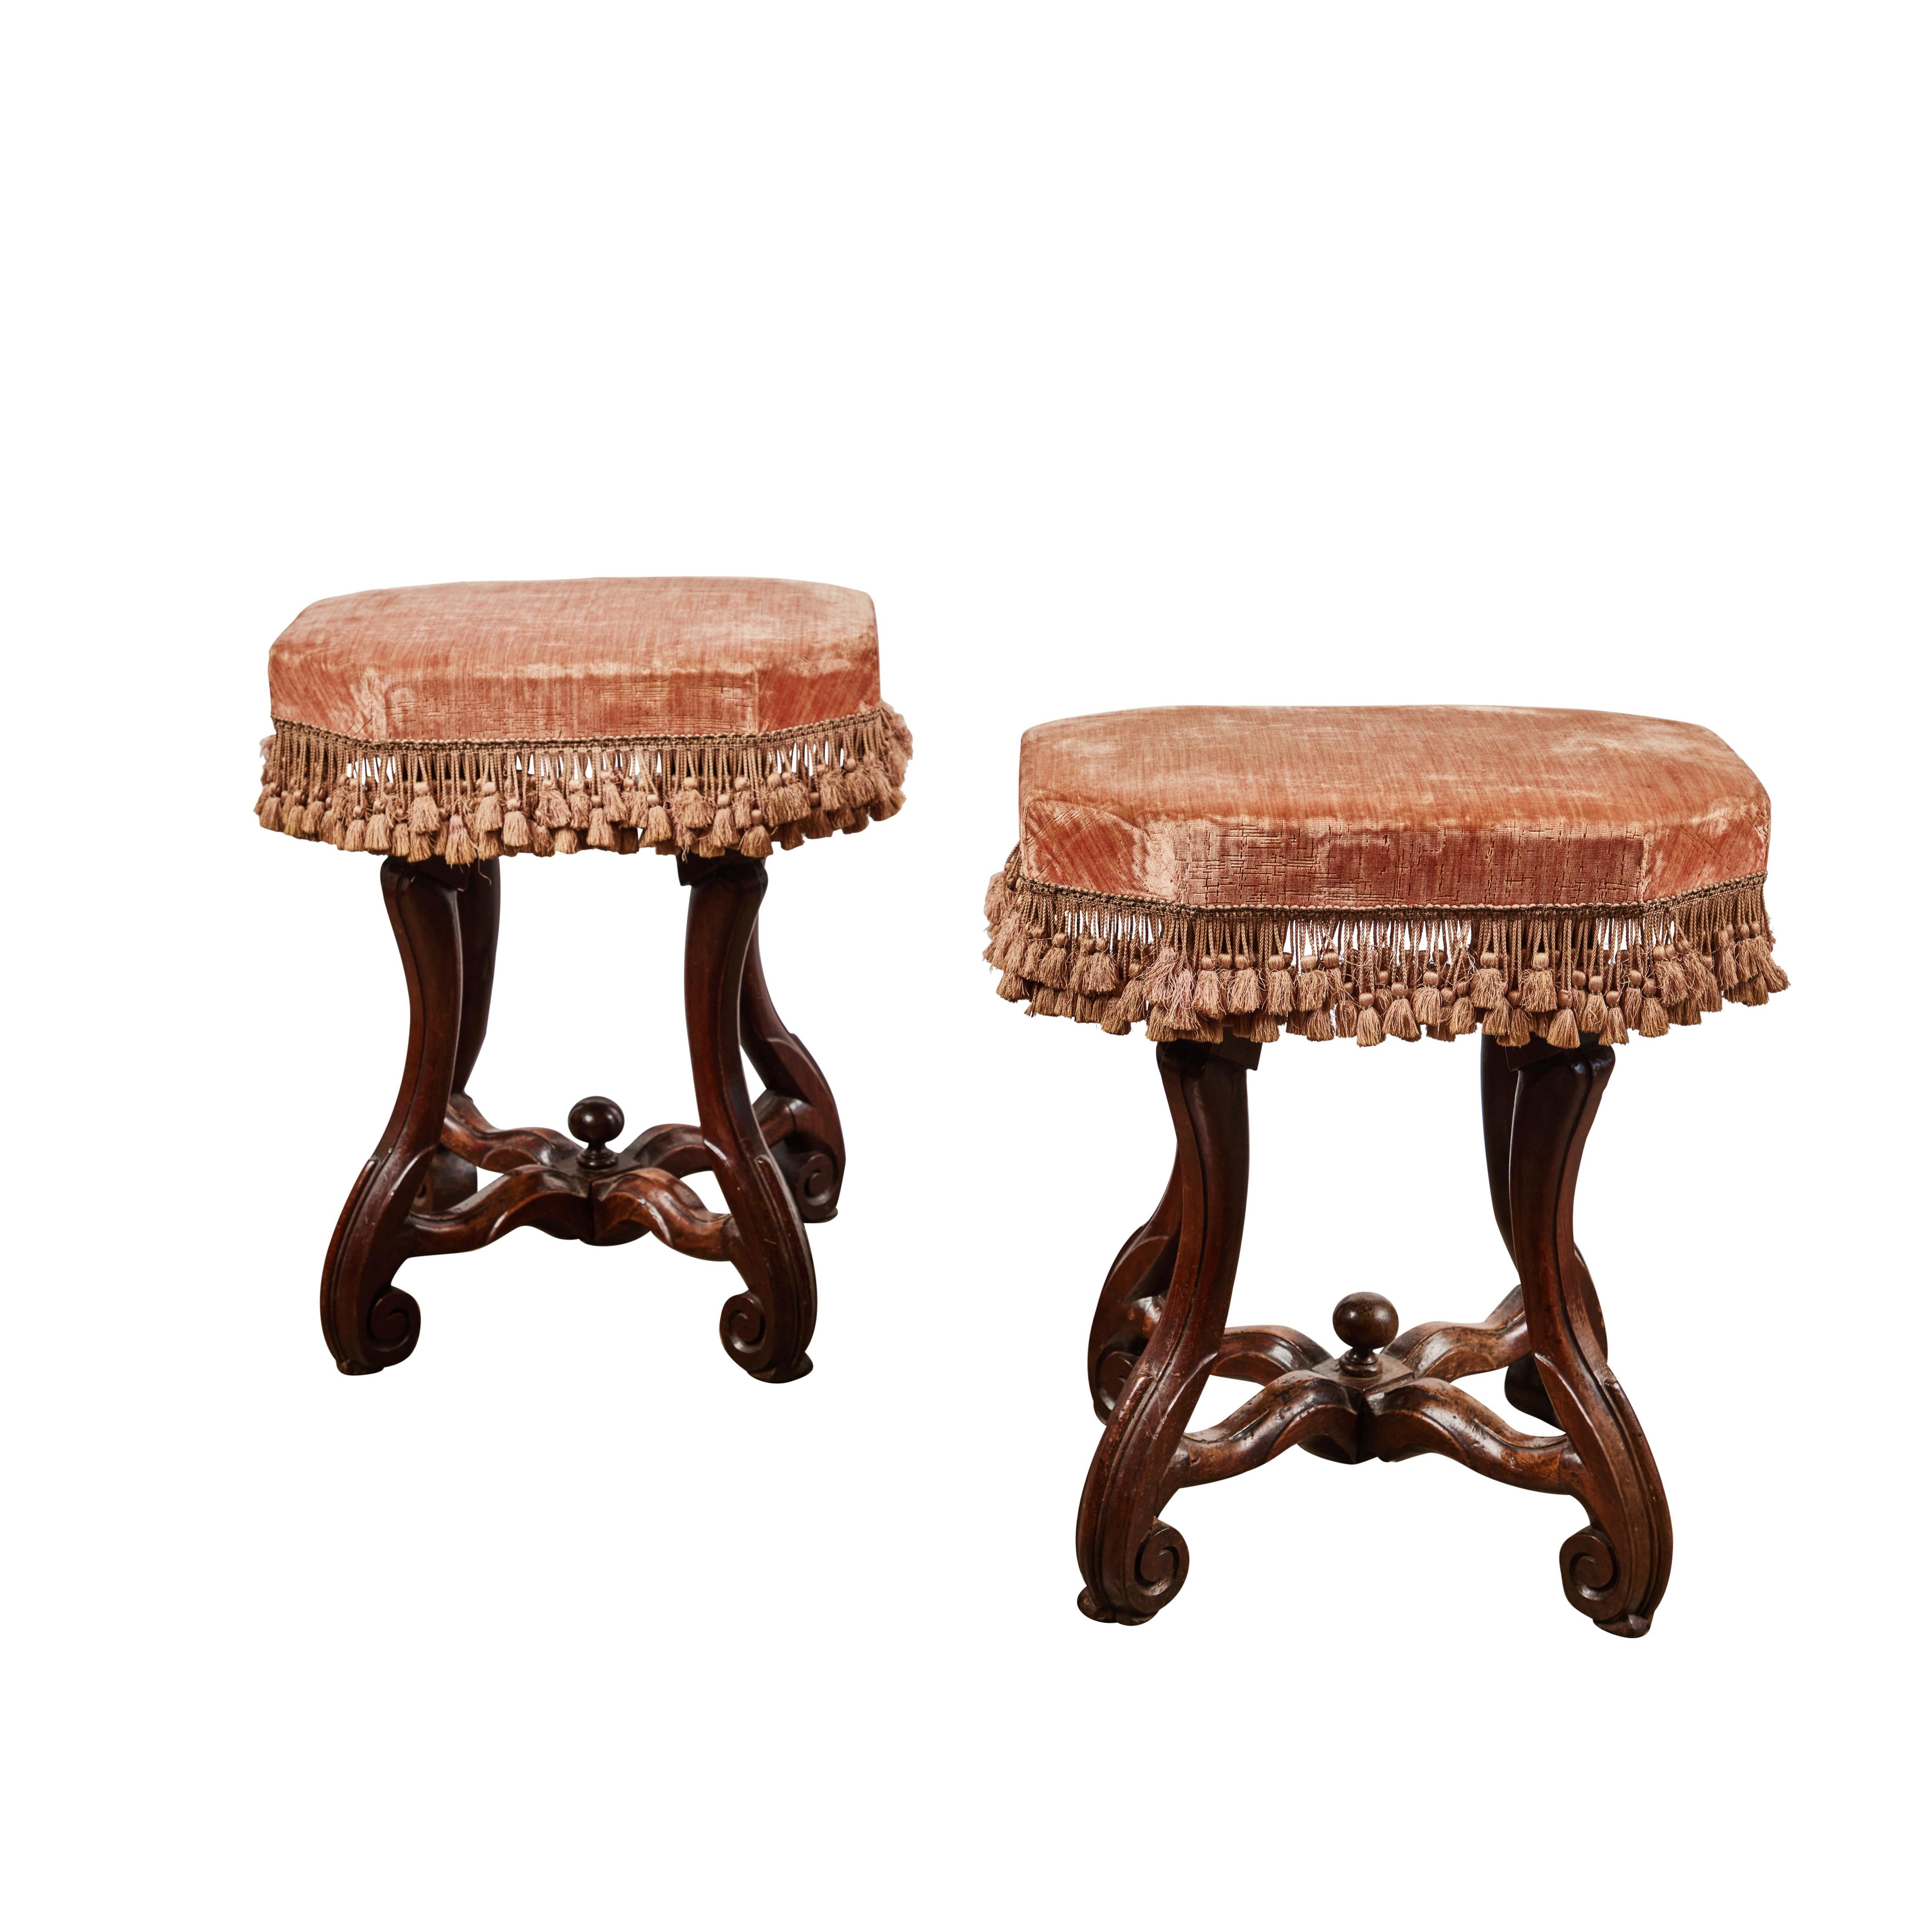 Pair of hand carved walnut rectangular shaped benches. Covered in later silk velvet fabric and fringe. The scroll legs give elegance to these benches.